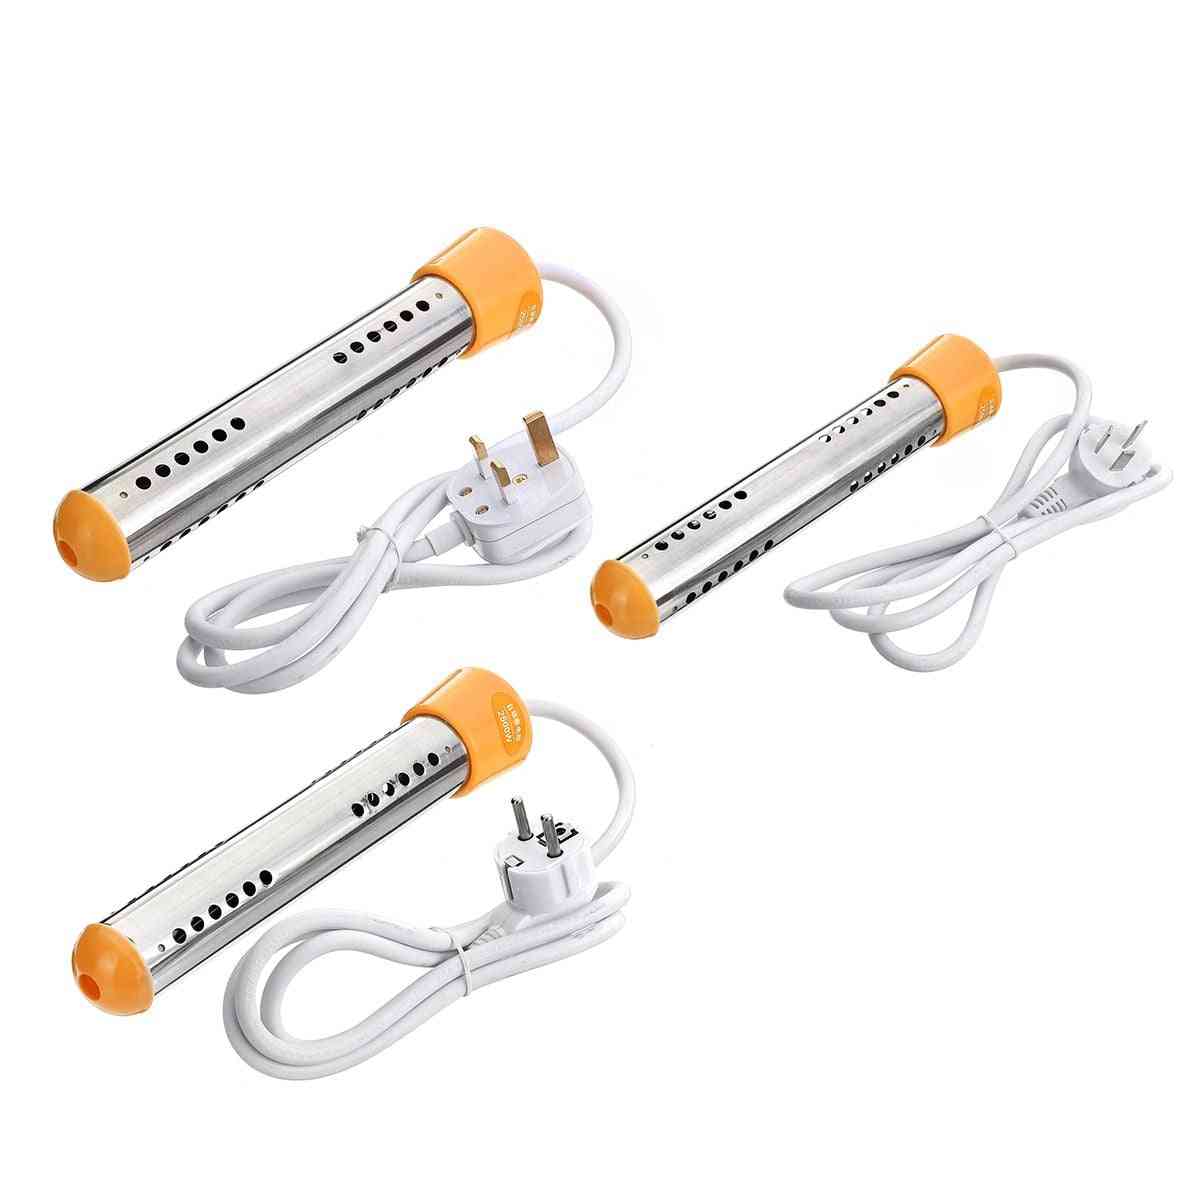 2000w Electric Water Heating Element, Portable Immersion Suspension